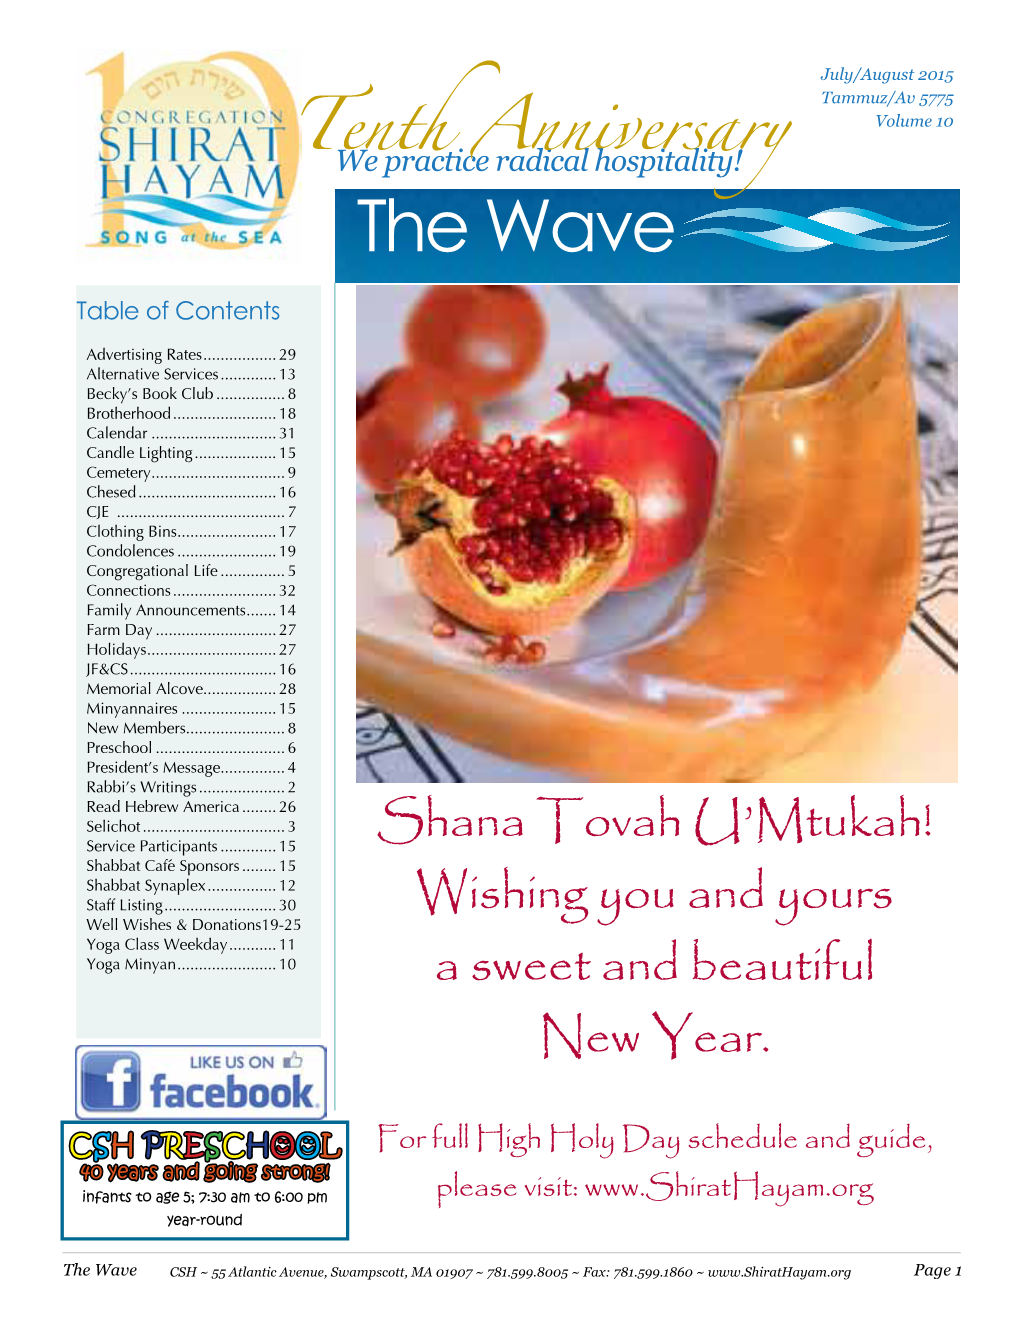 The Wave – September 2015